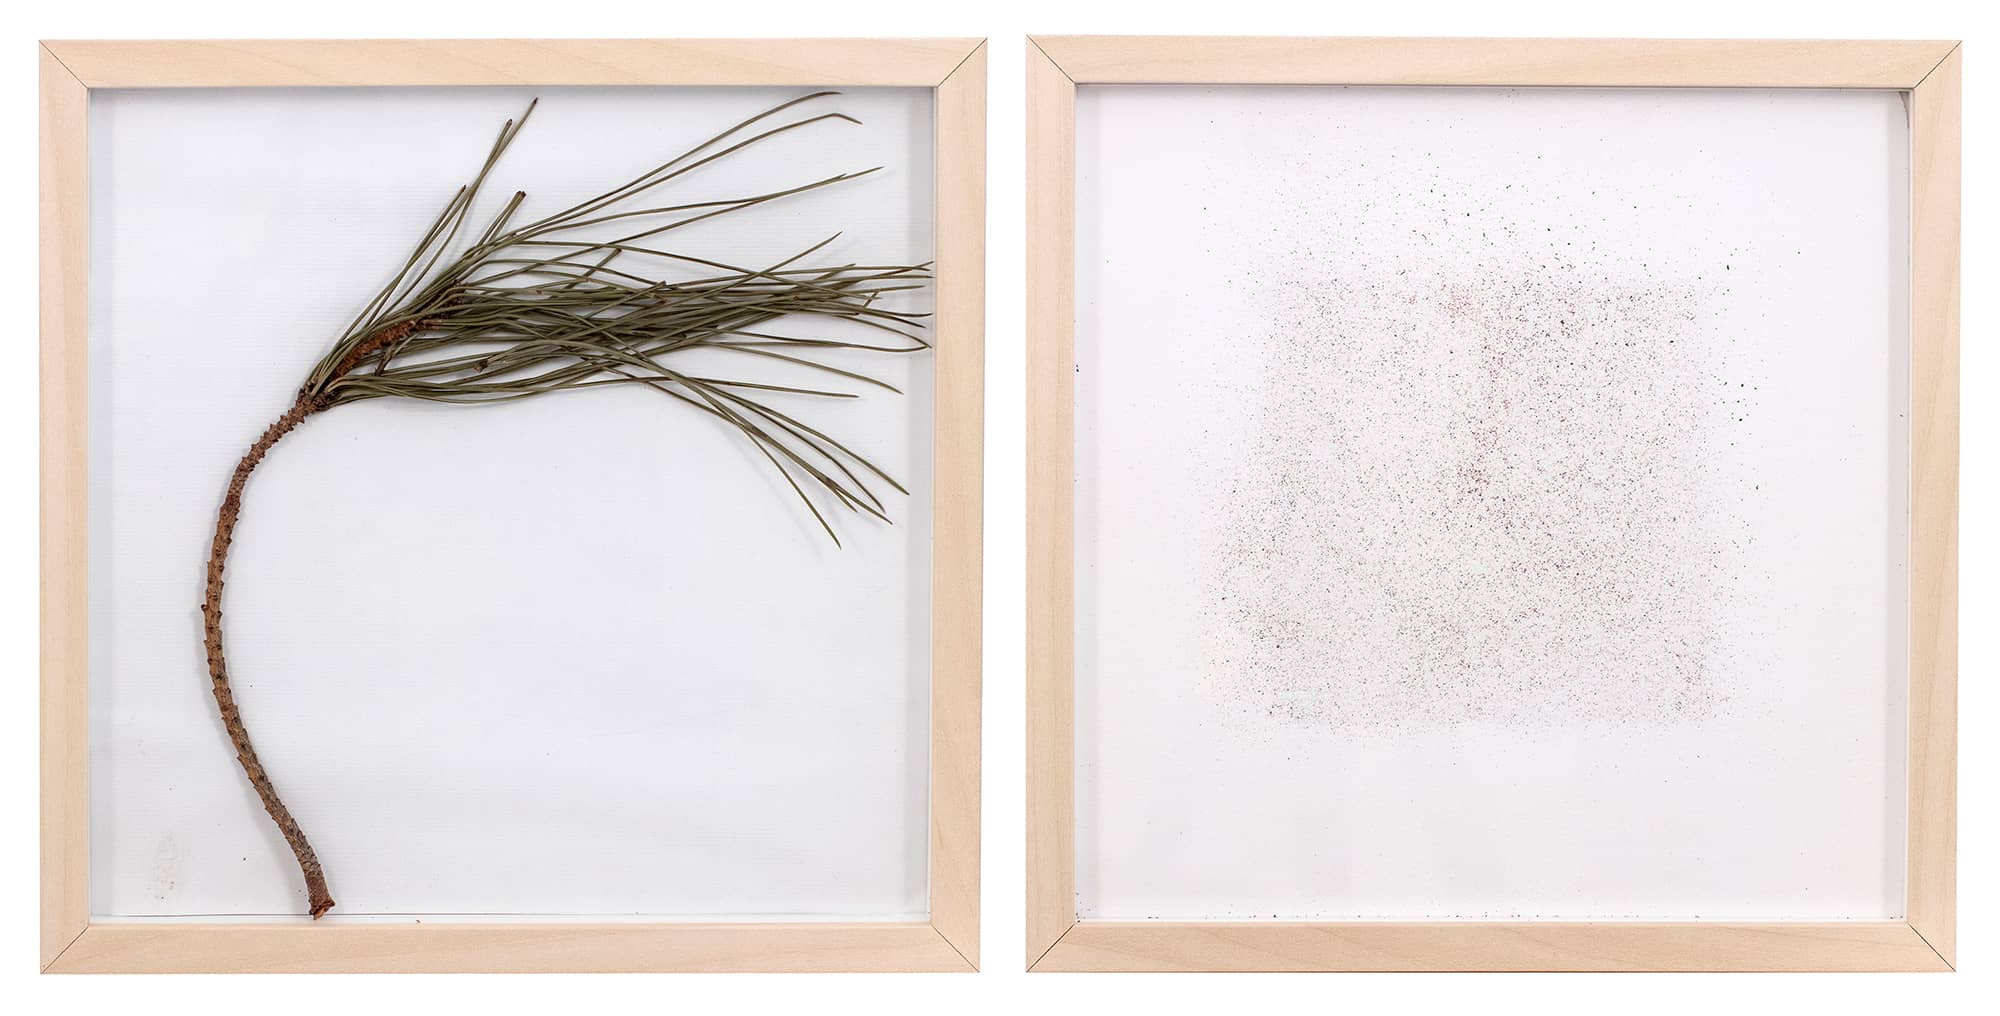 'Pinus Pinea', assemblage (pine branch and natural pigment on paper, framed). Artwork by Francesca Virginia Coppola